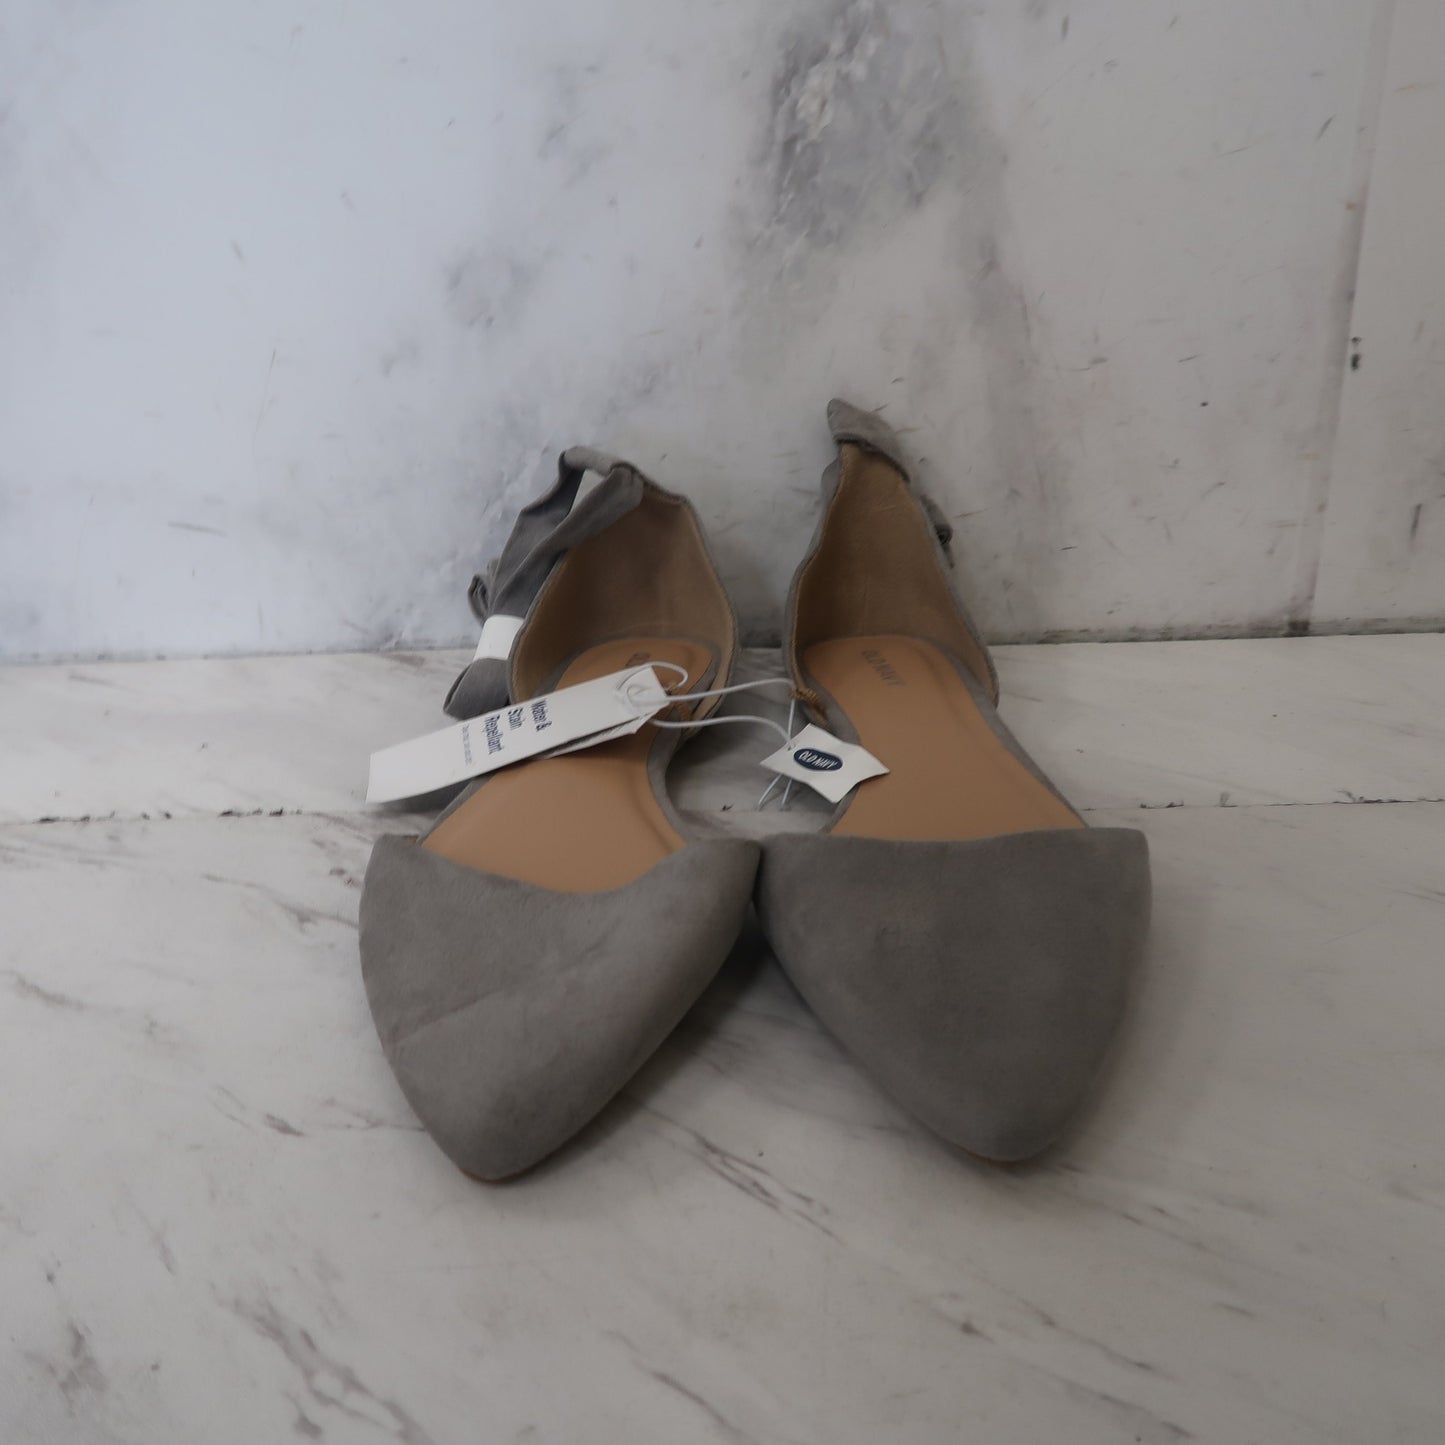 Shoes Flats Ballet By Old Navy  Size: 8.5